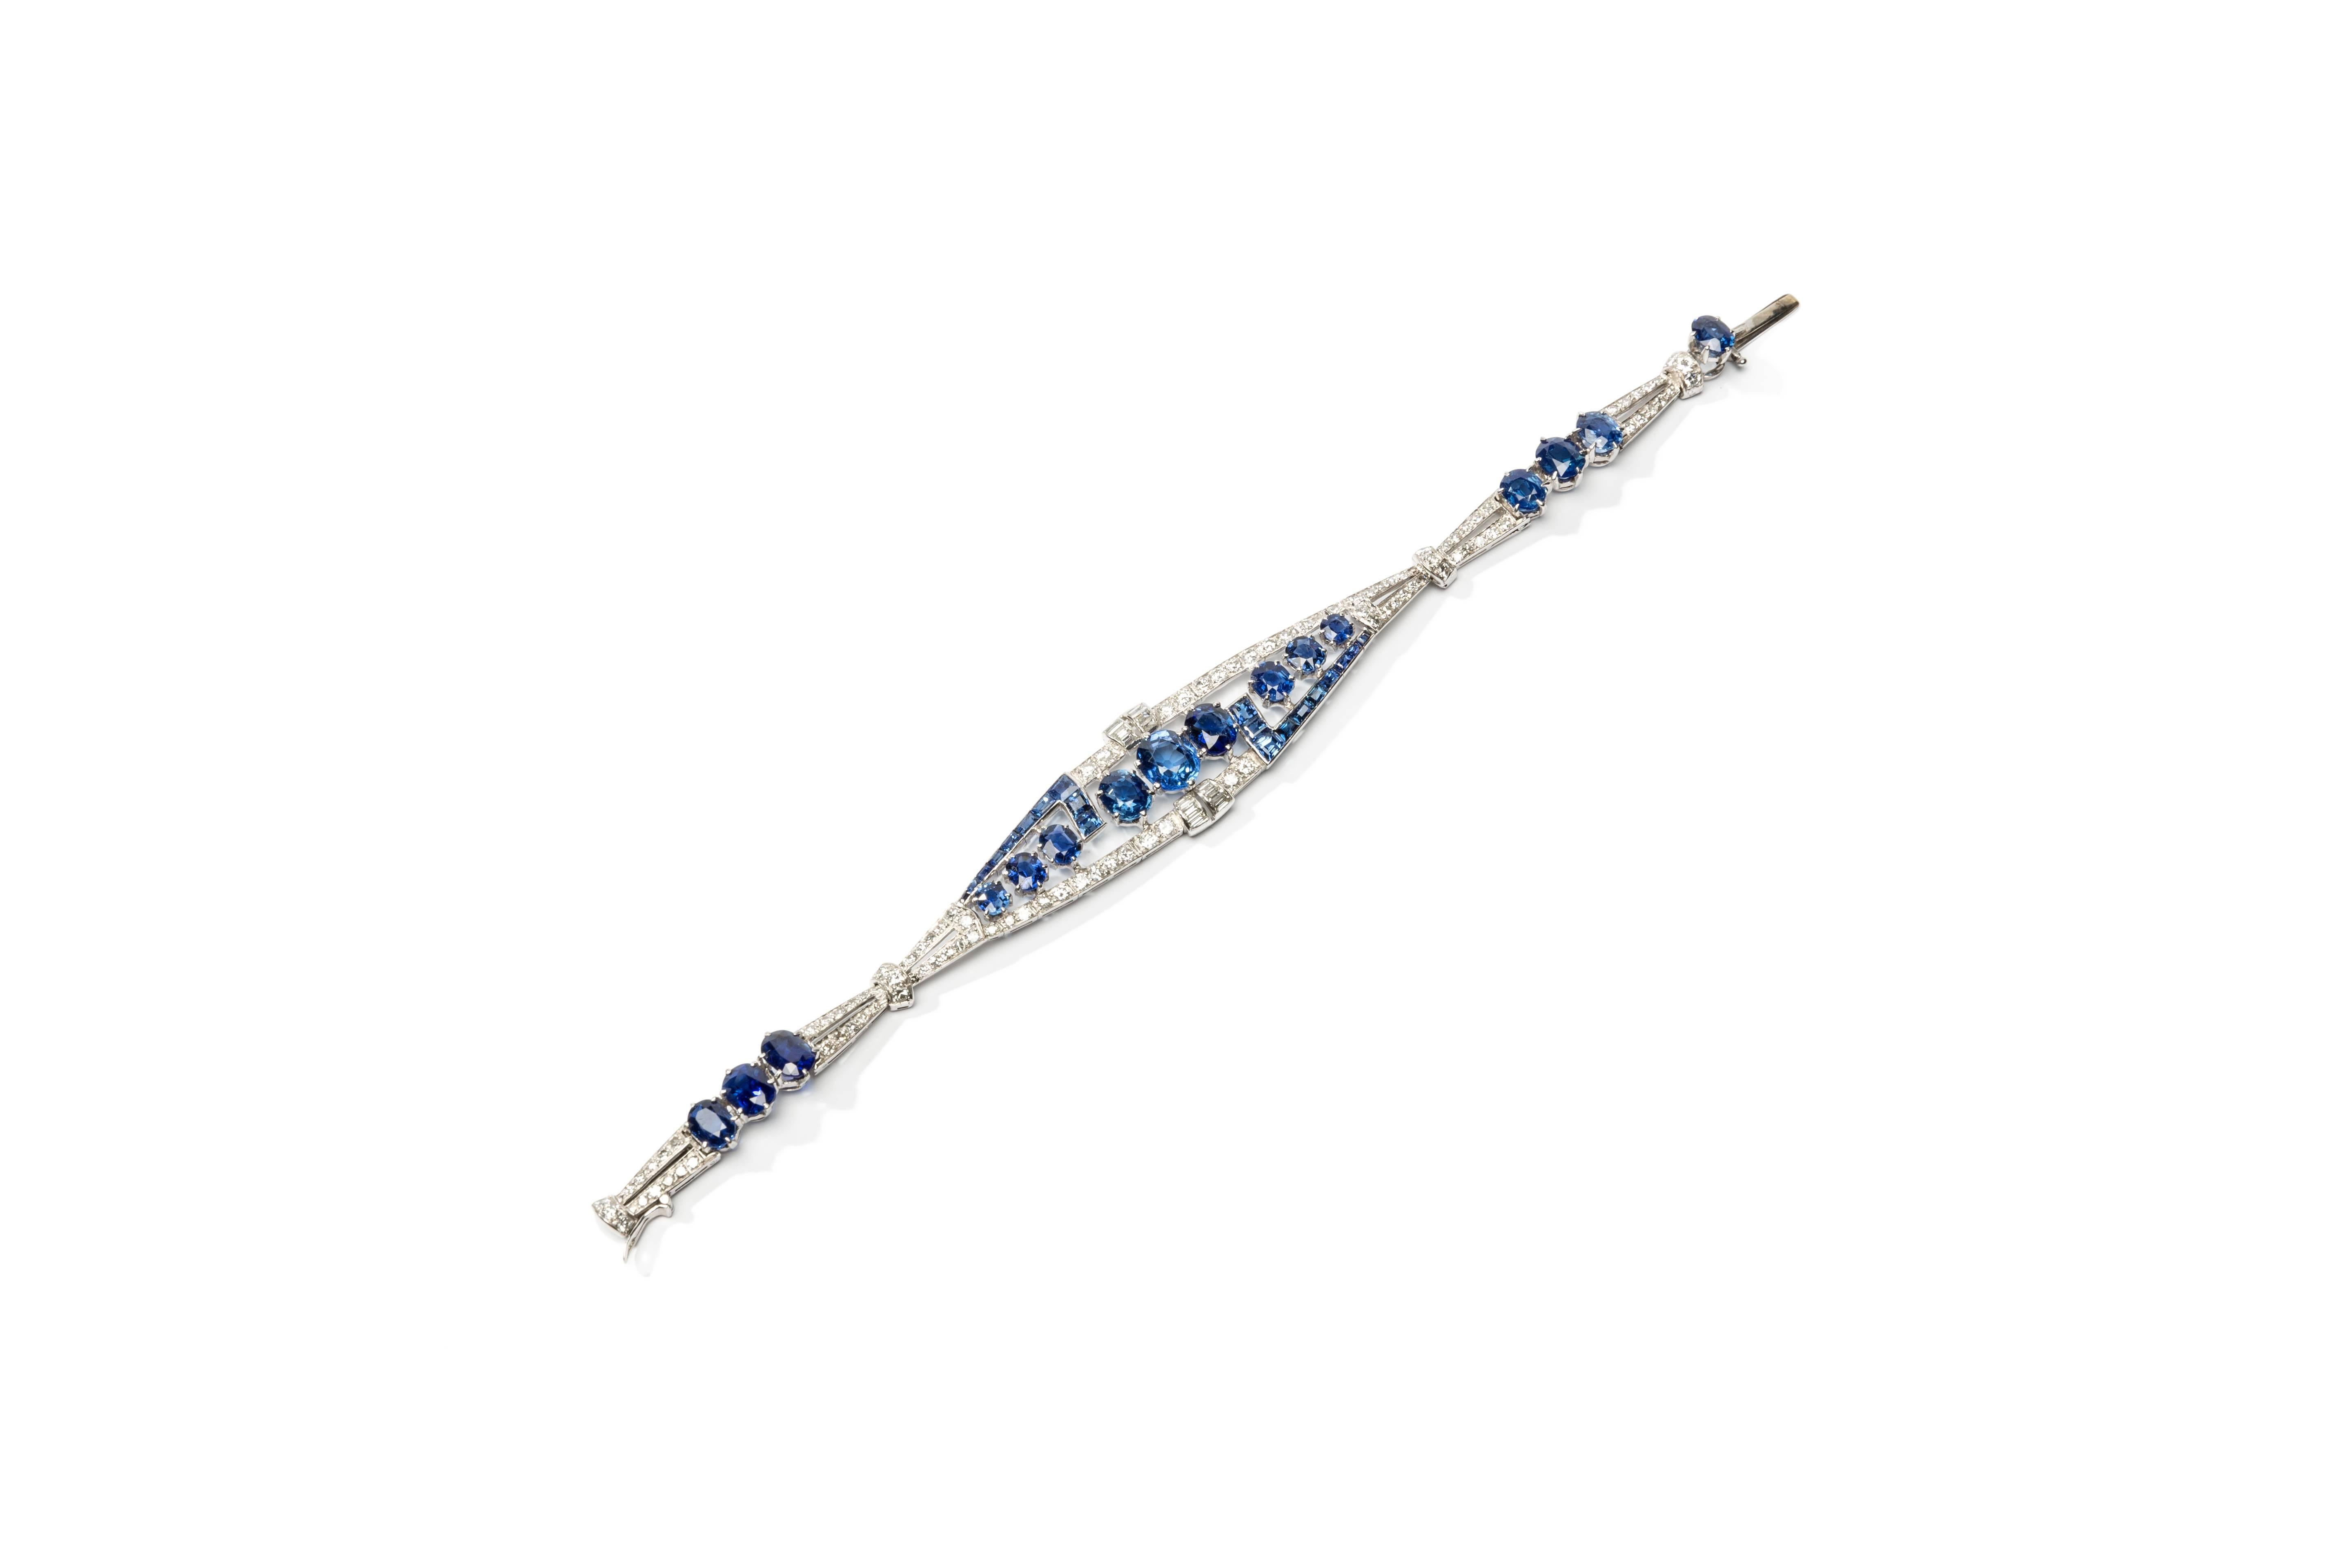 Art Deco, 1930. Decorated with a row of 16 oval-shaped sapphire and 20 sapphire in baguette- cut weighing approximately 13 ct. With 12 baguette-cut diamonds weighing ca. 1,4 ct. 104 old-mine-cut and brilliant-cut diamonds weighing ca. 2 ct., clarity